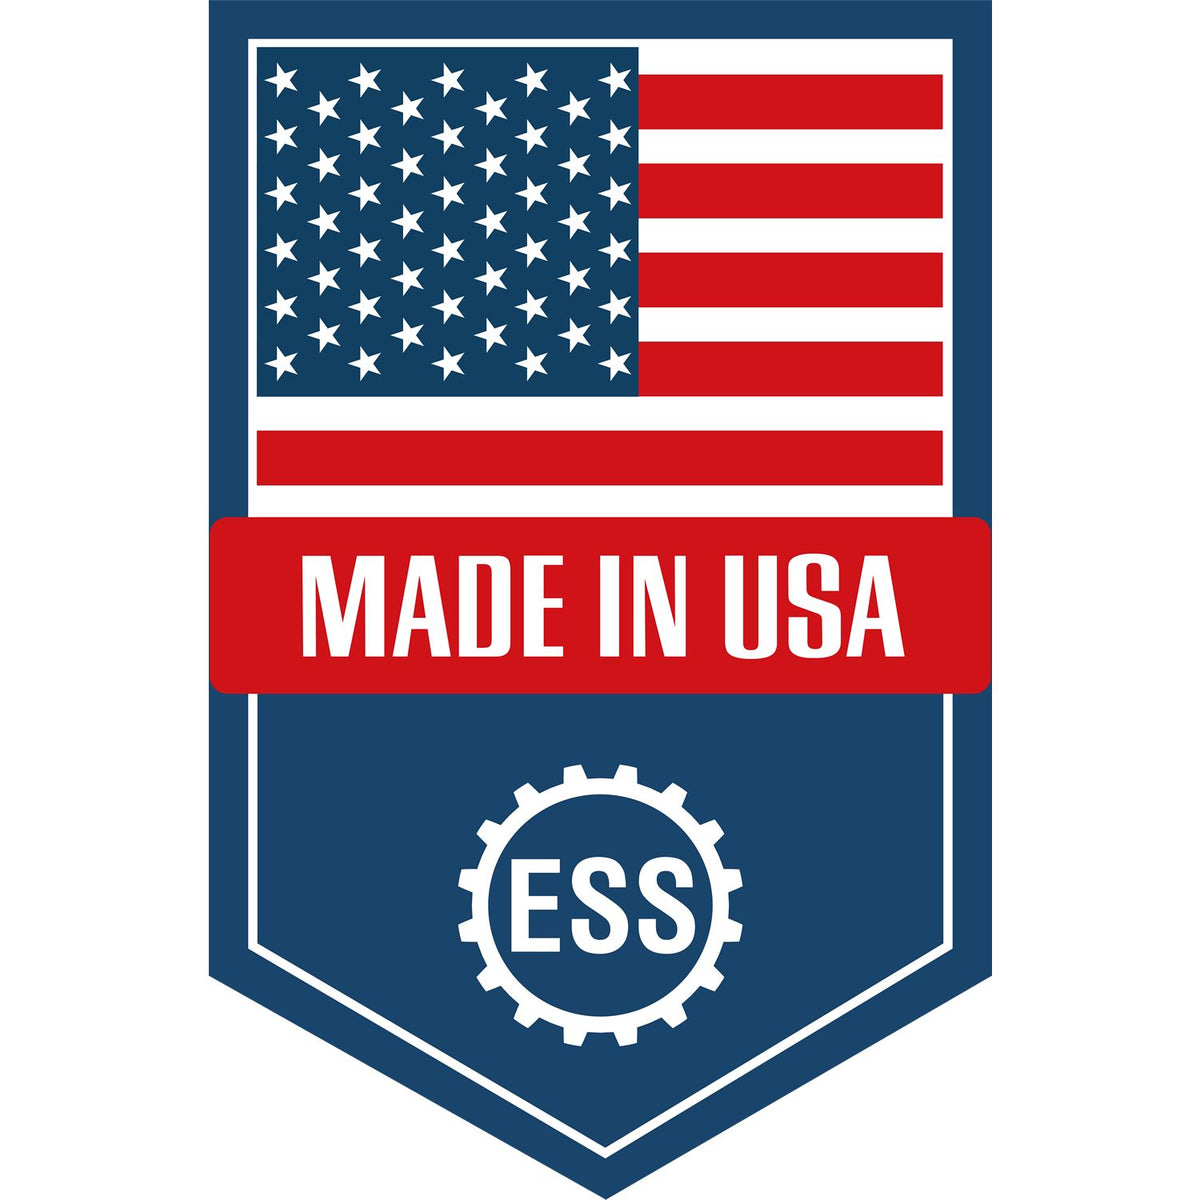 An icon or graphic with an american flag and text reading Made in USA for the Slim Pre-Inked Nebraska Professional Engineer Seal Stamp